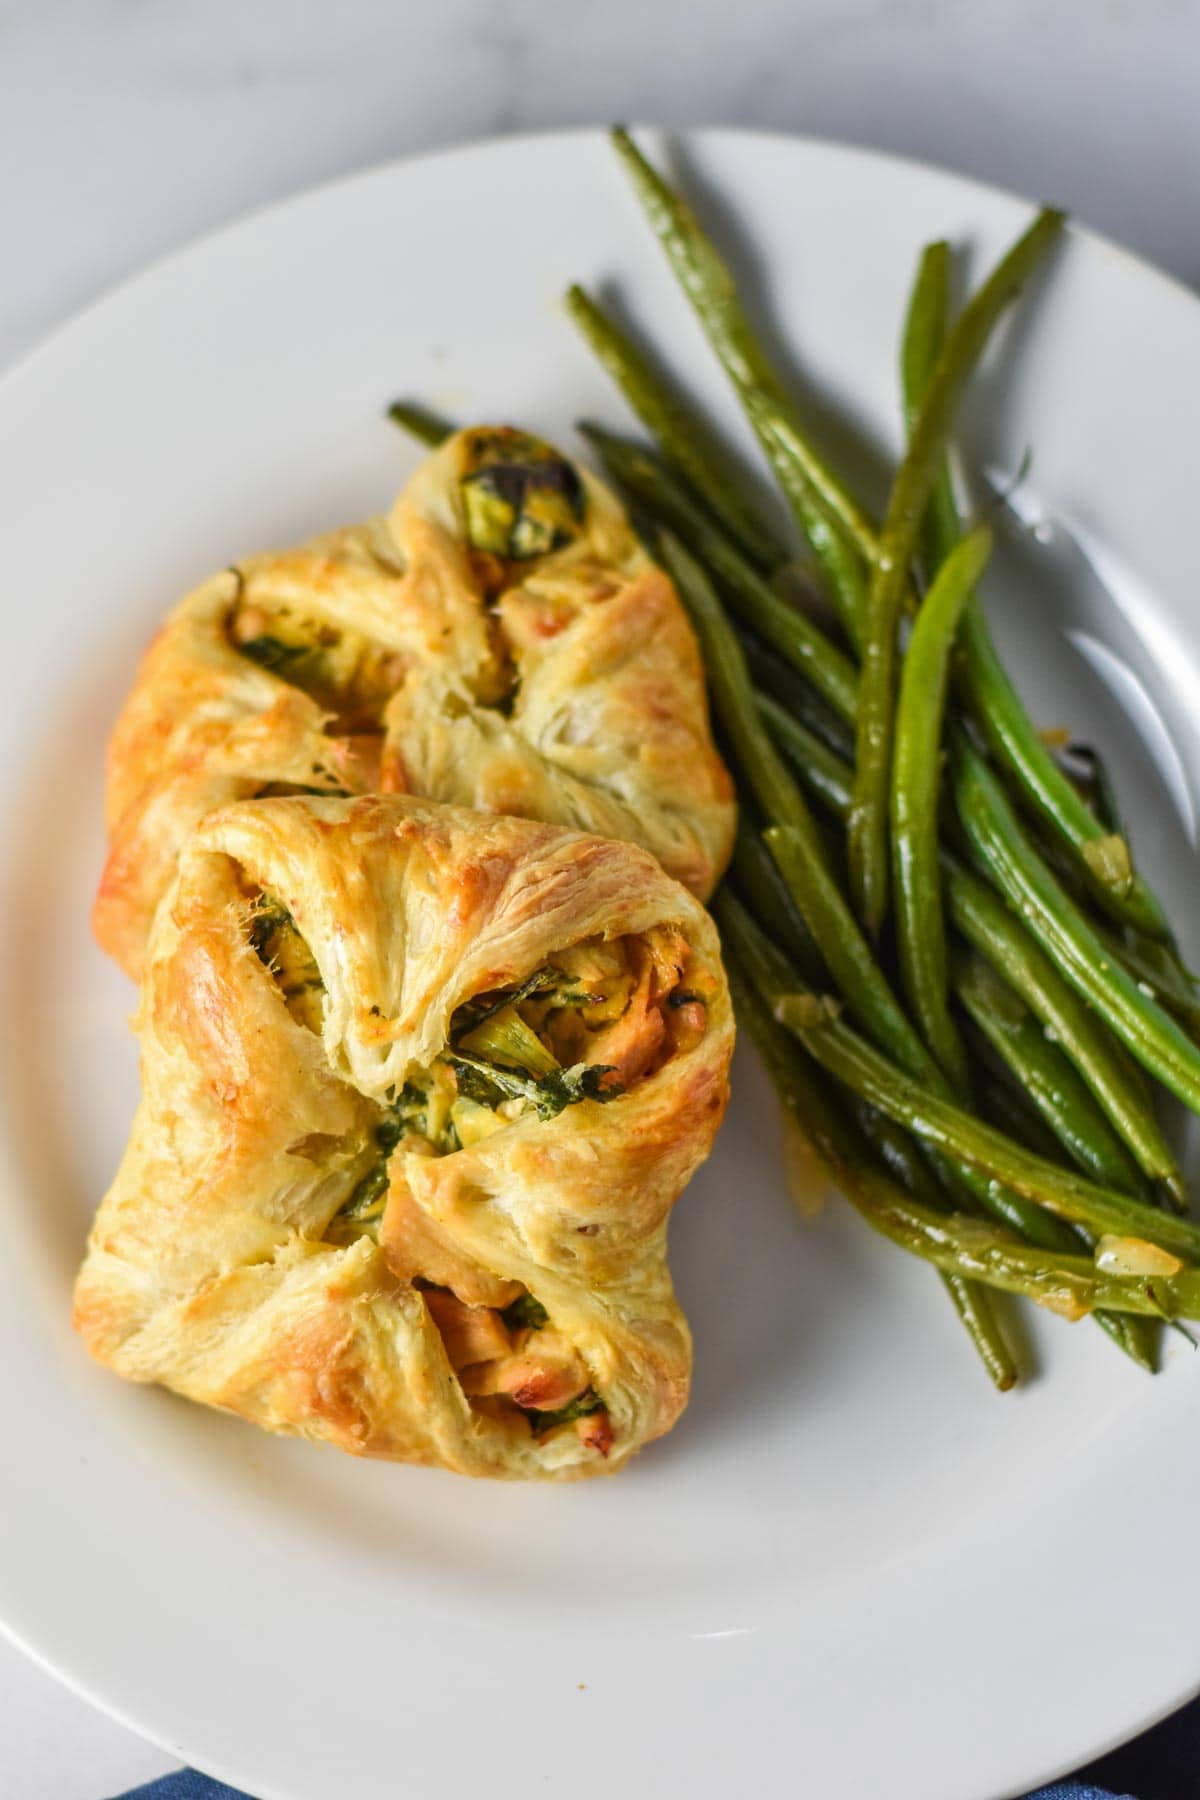 Two chicken in puff pastries next to green beans.